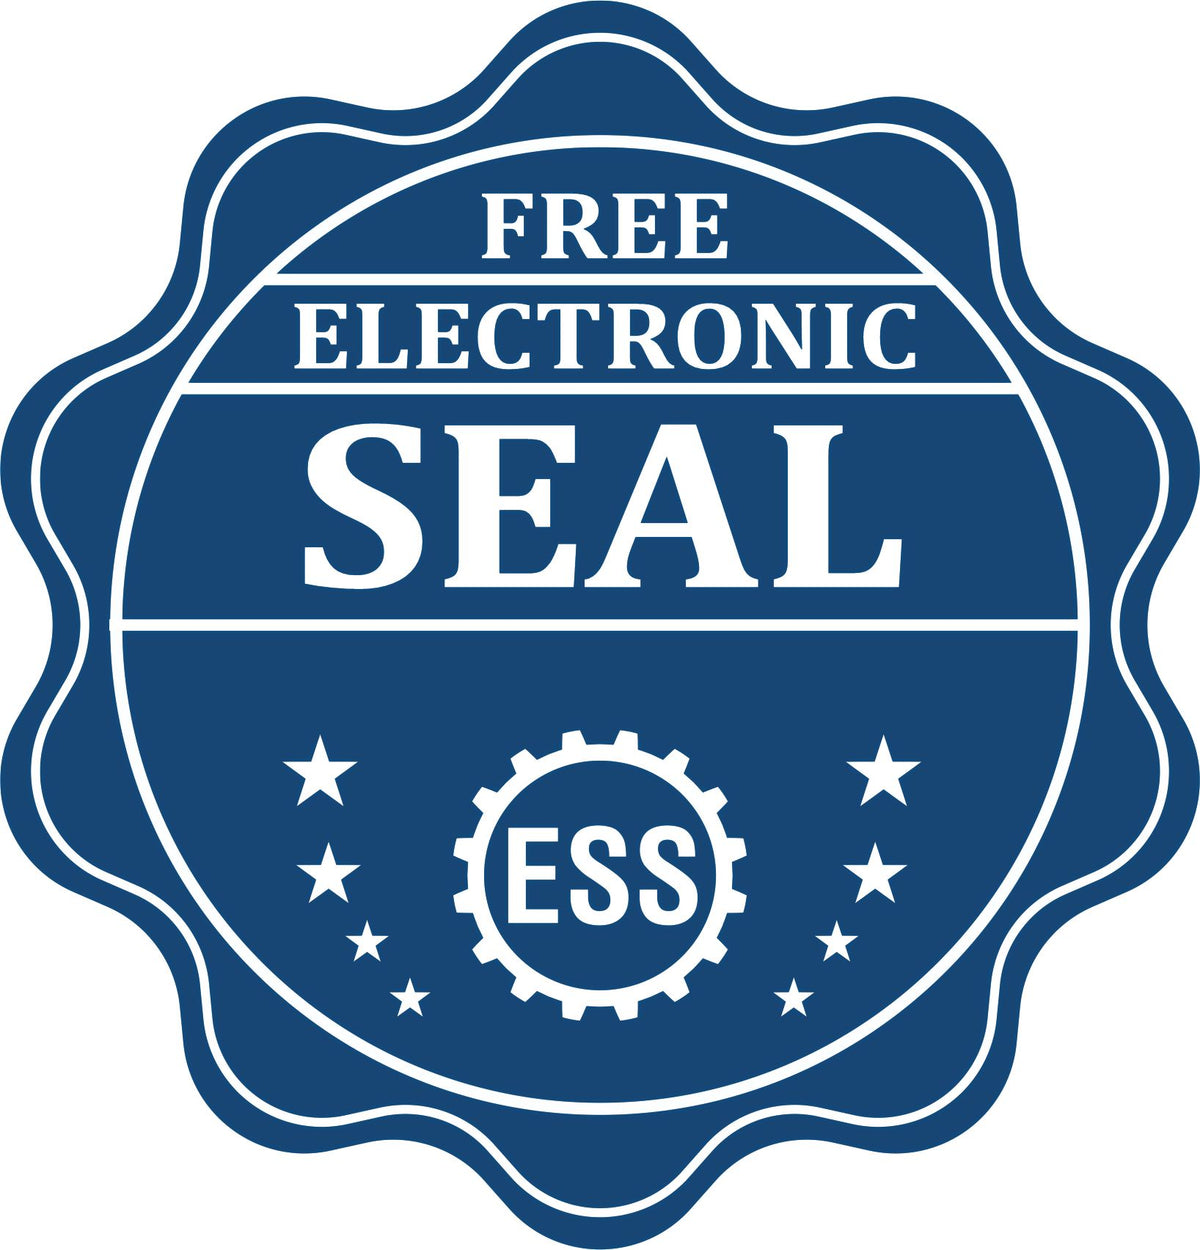 A badge showing a free electronic seal for the Handheld West Virginia Professional Geologist Embosser with stars and the ESS gear on the emblem.